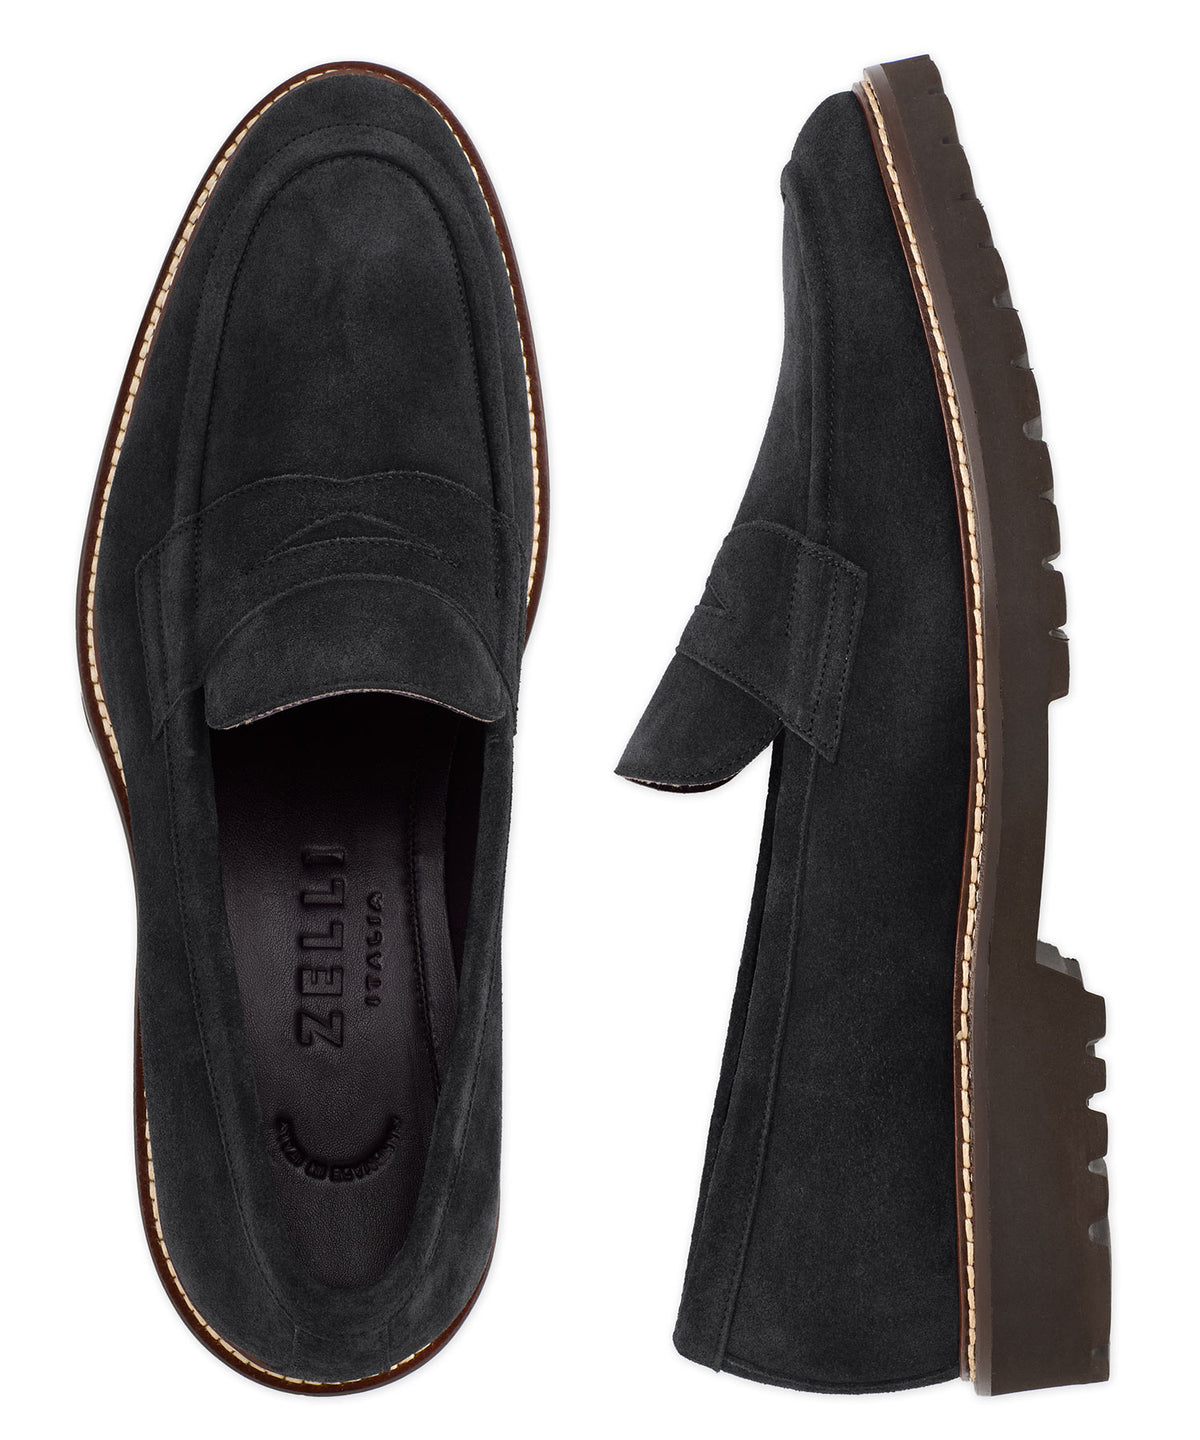 Zelli Roma Countryside Suede Lug Sole Loafer